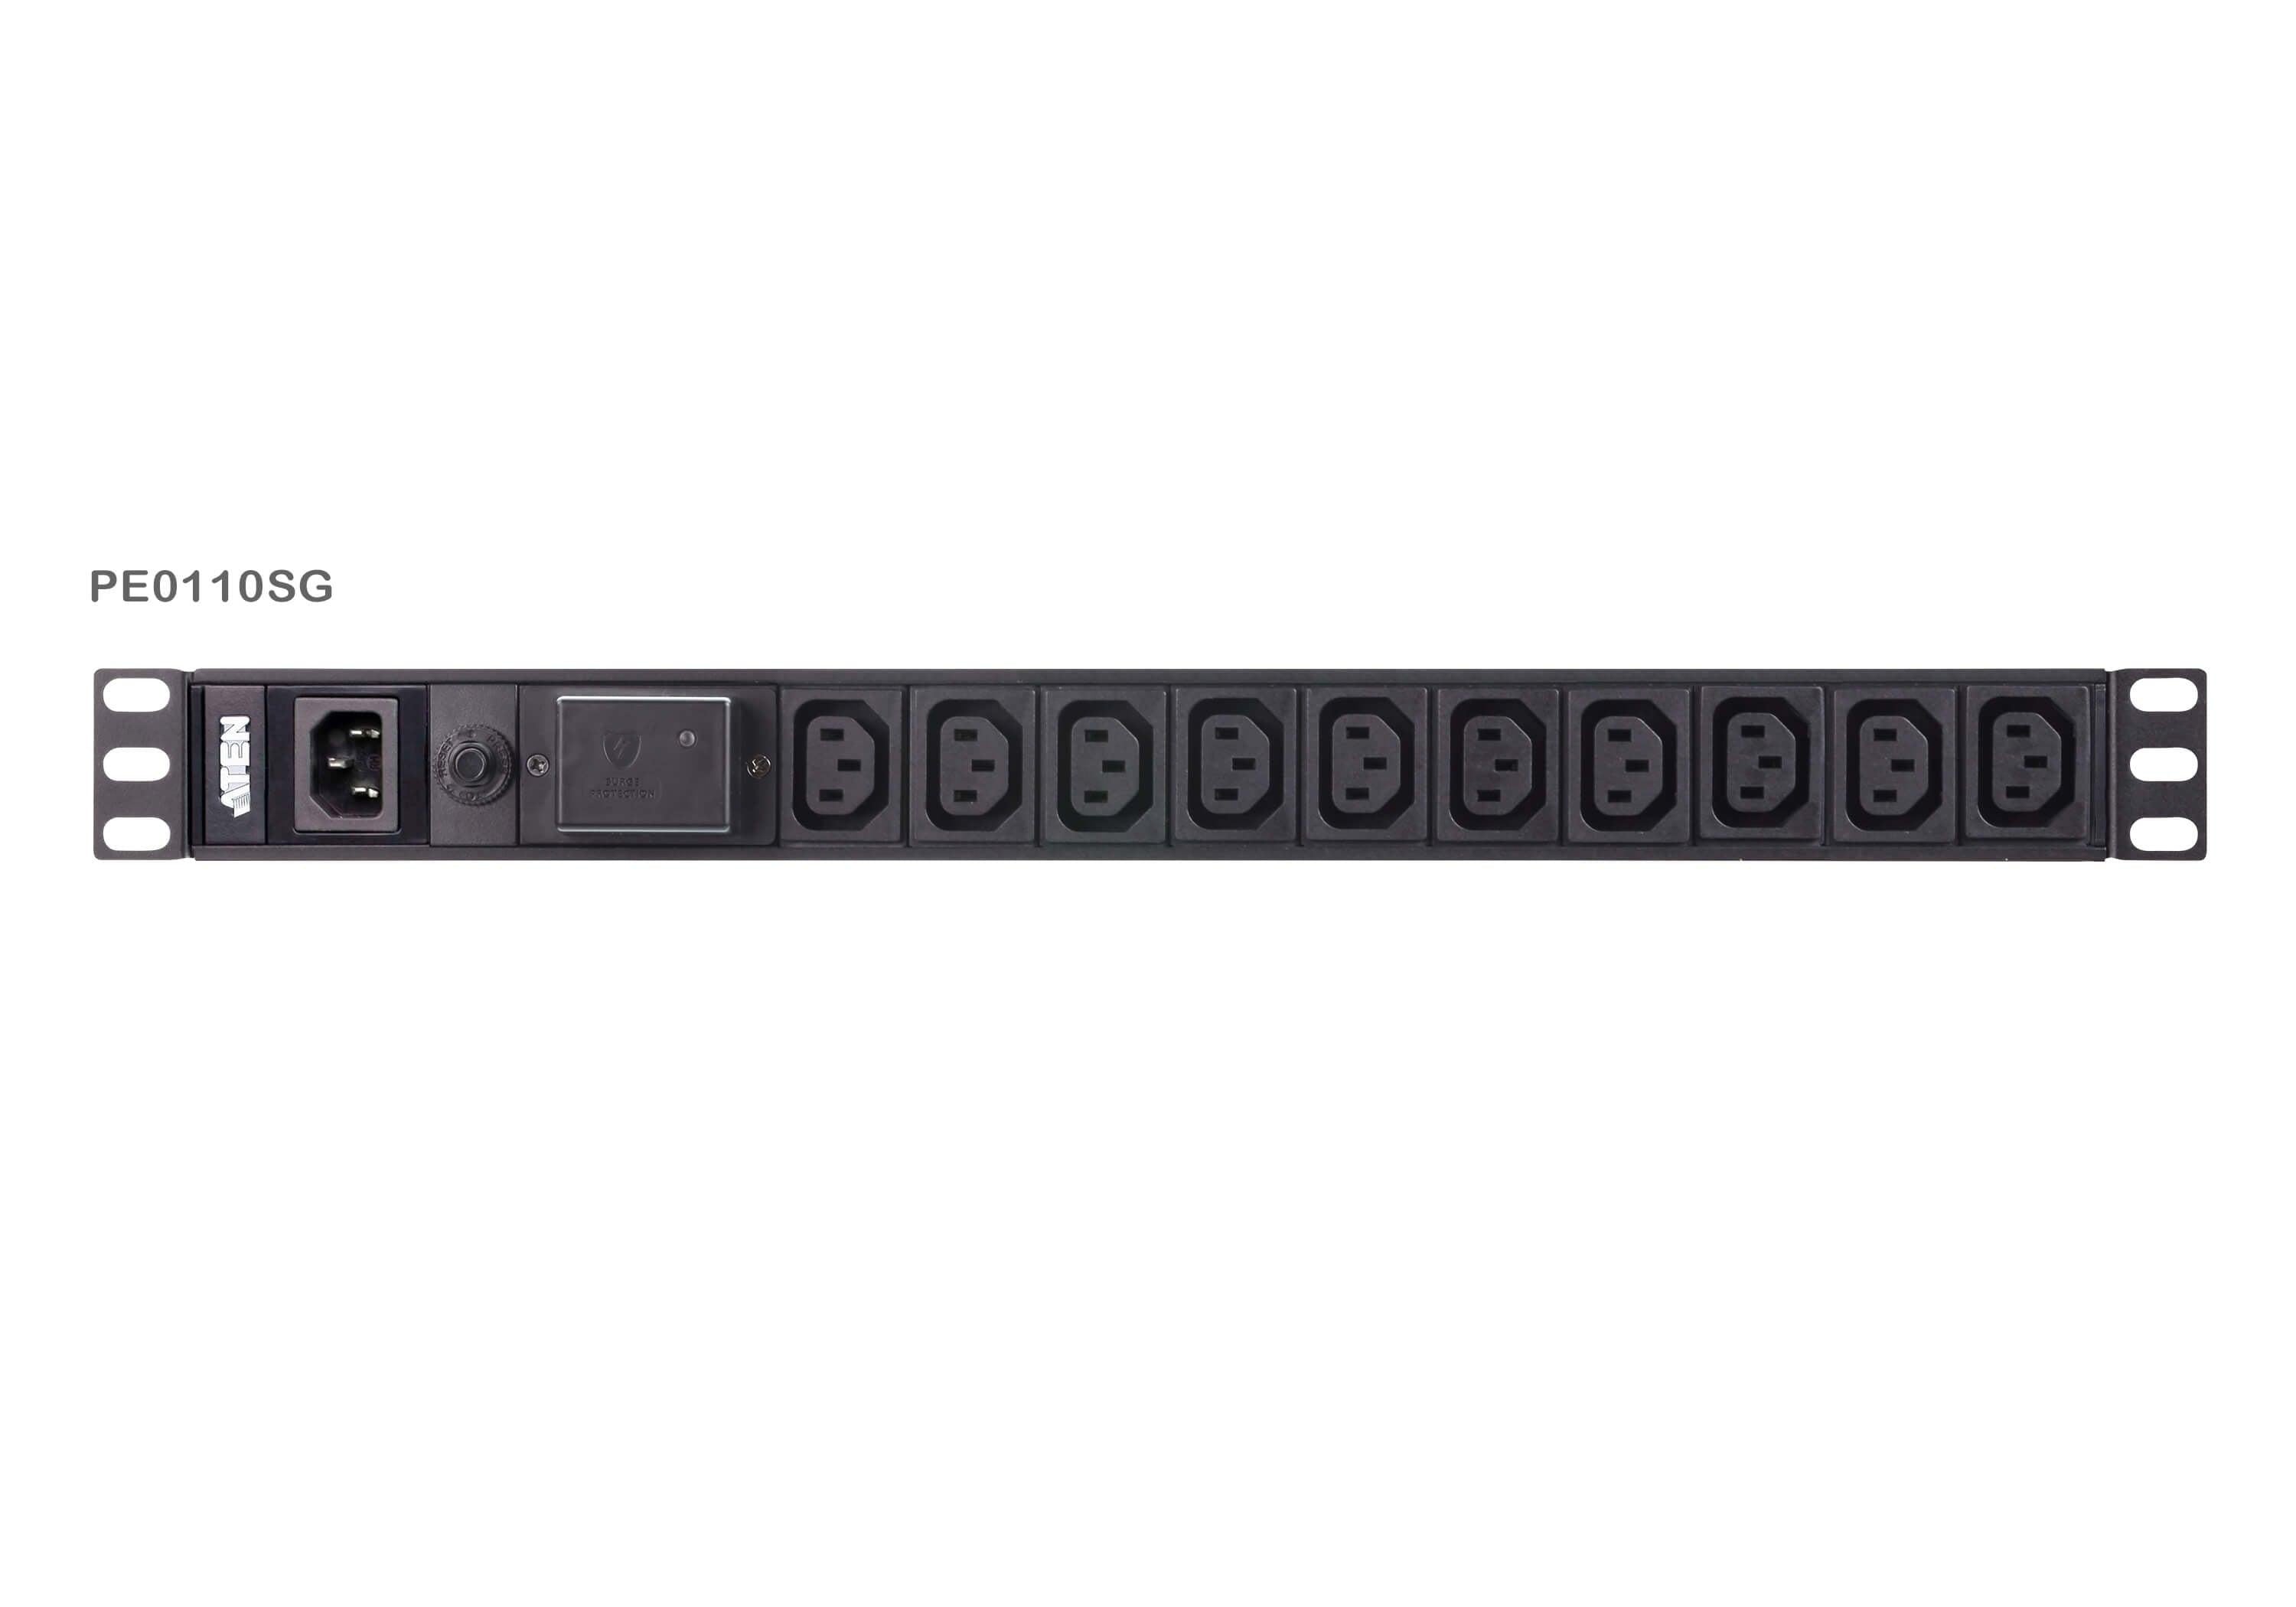 ATEN 10 Port 1U Basic PDU with Surge Protection, supports 10A with 10 IEC C13 outputs ATEN